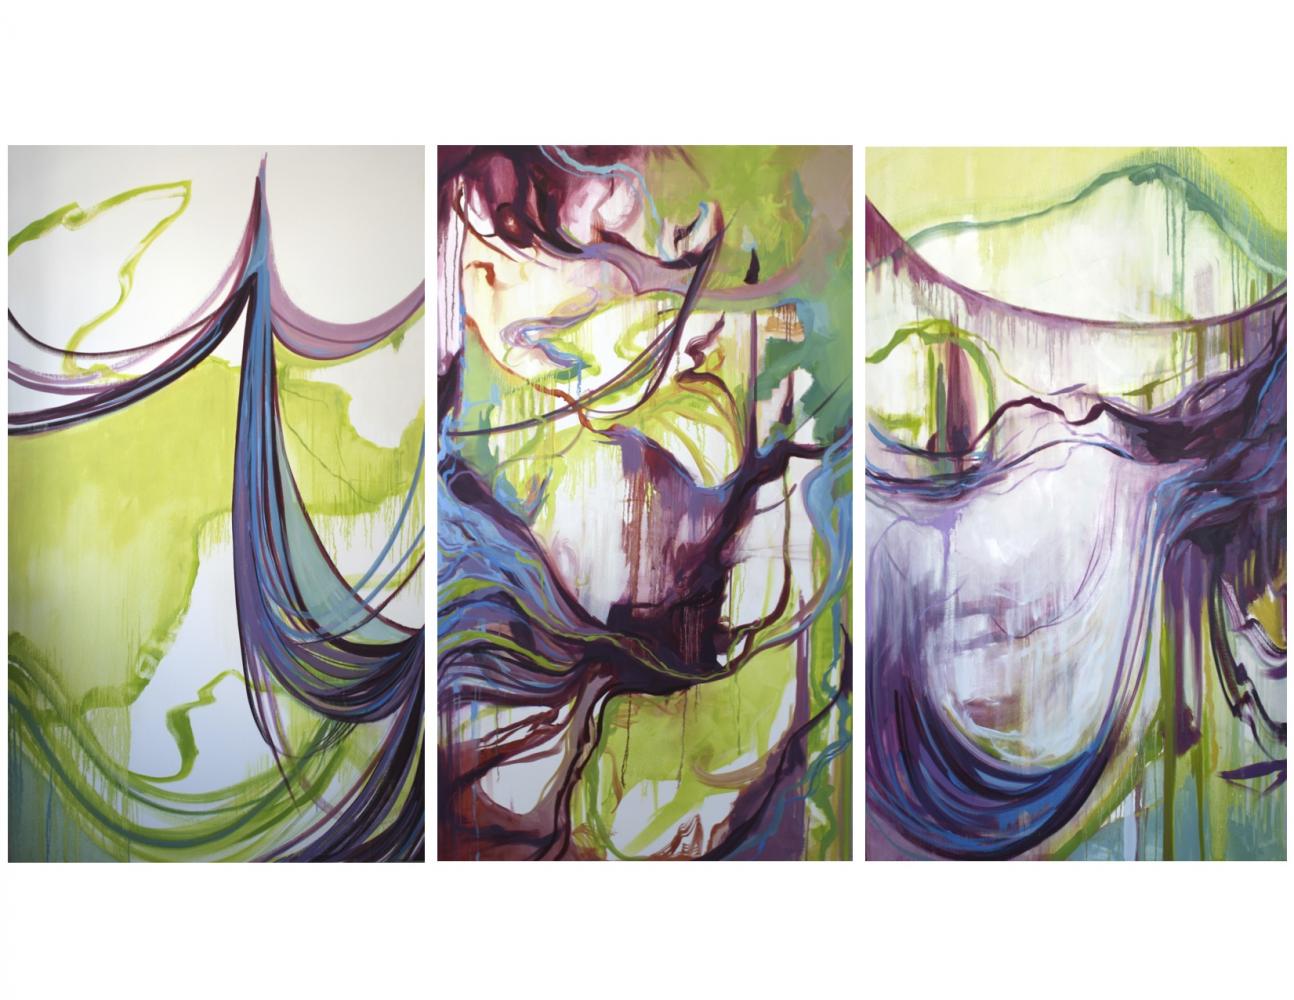 Private Commission (Triptych)